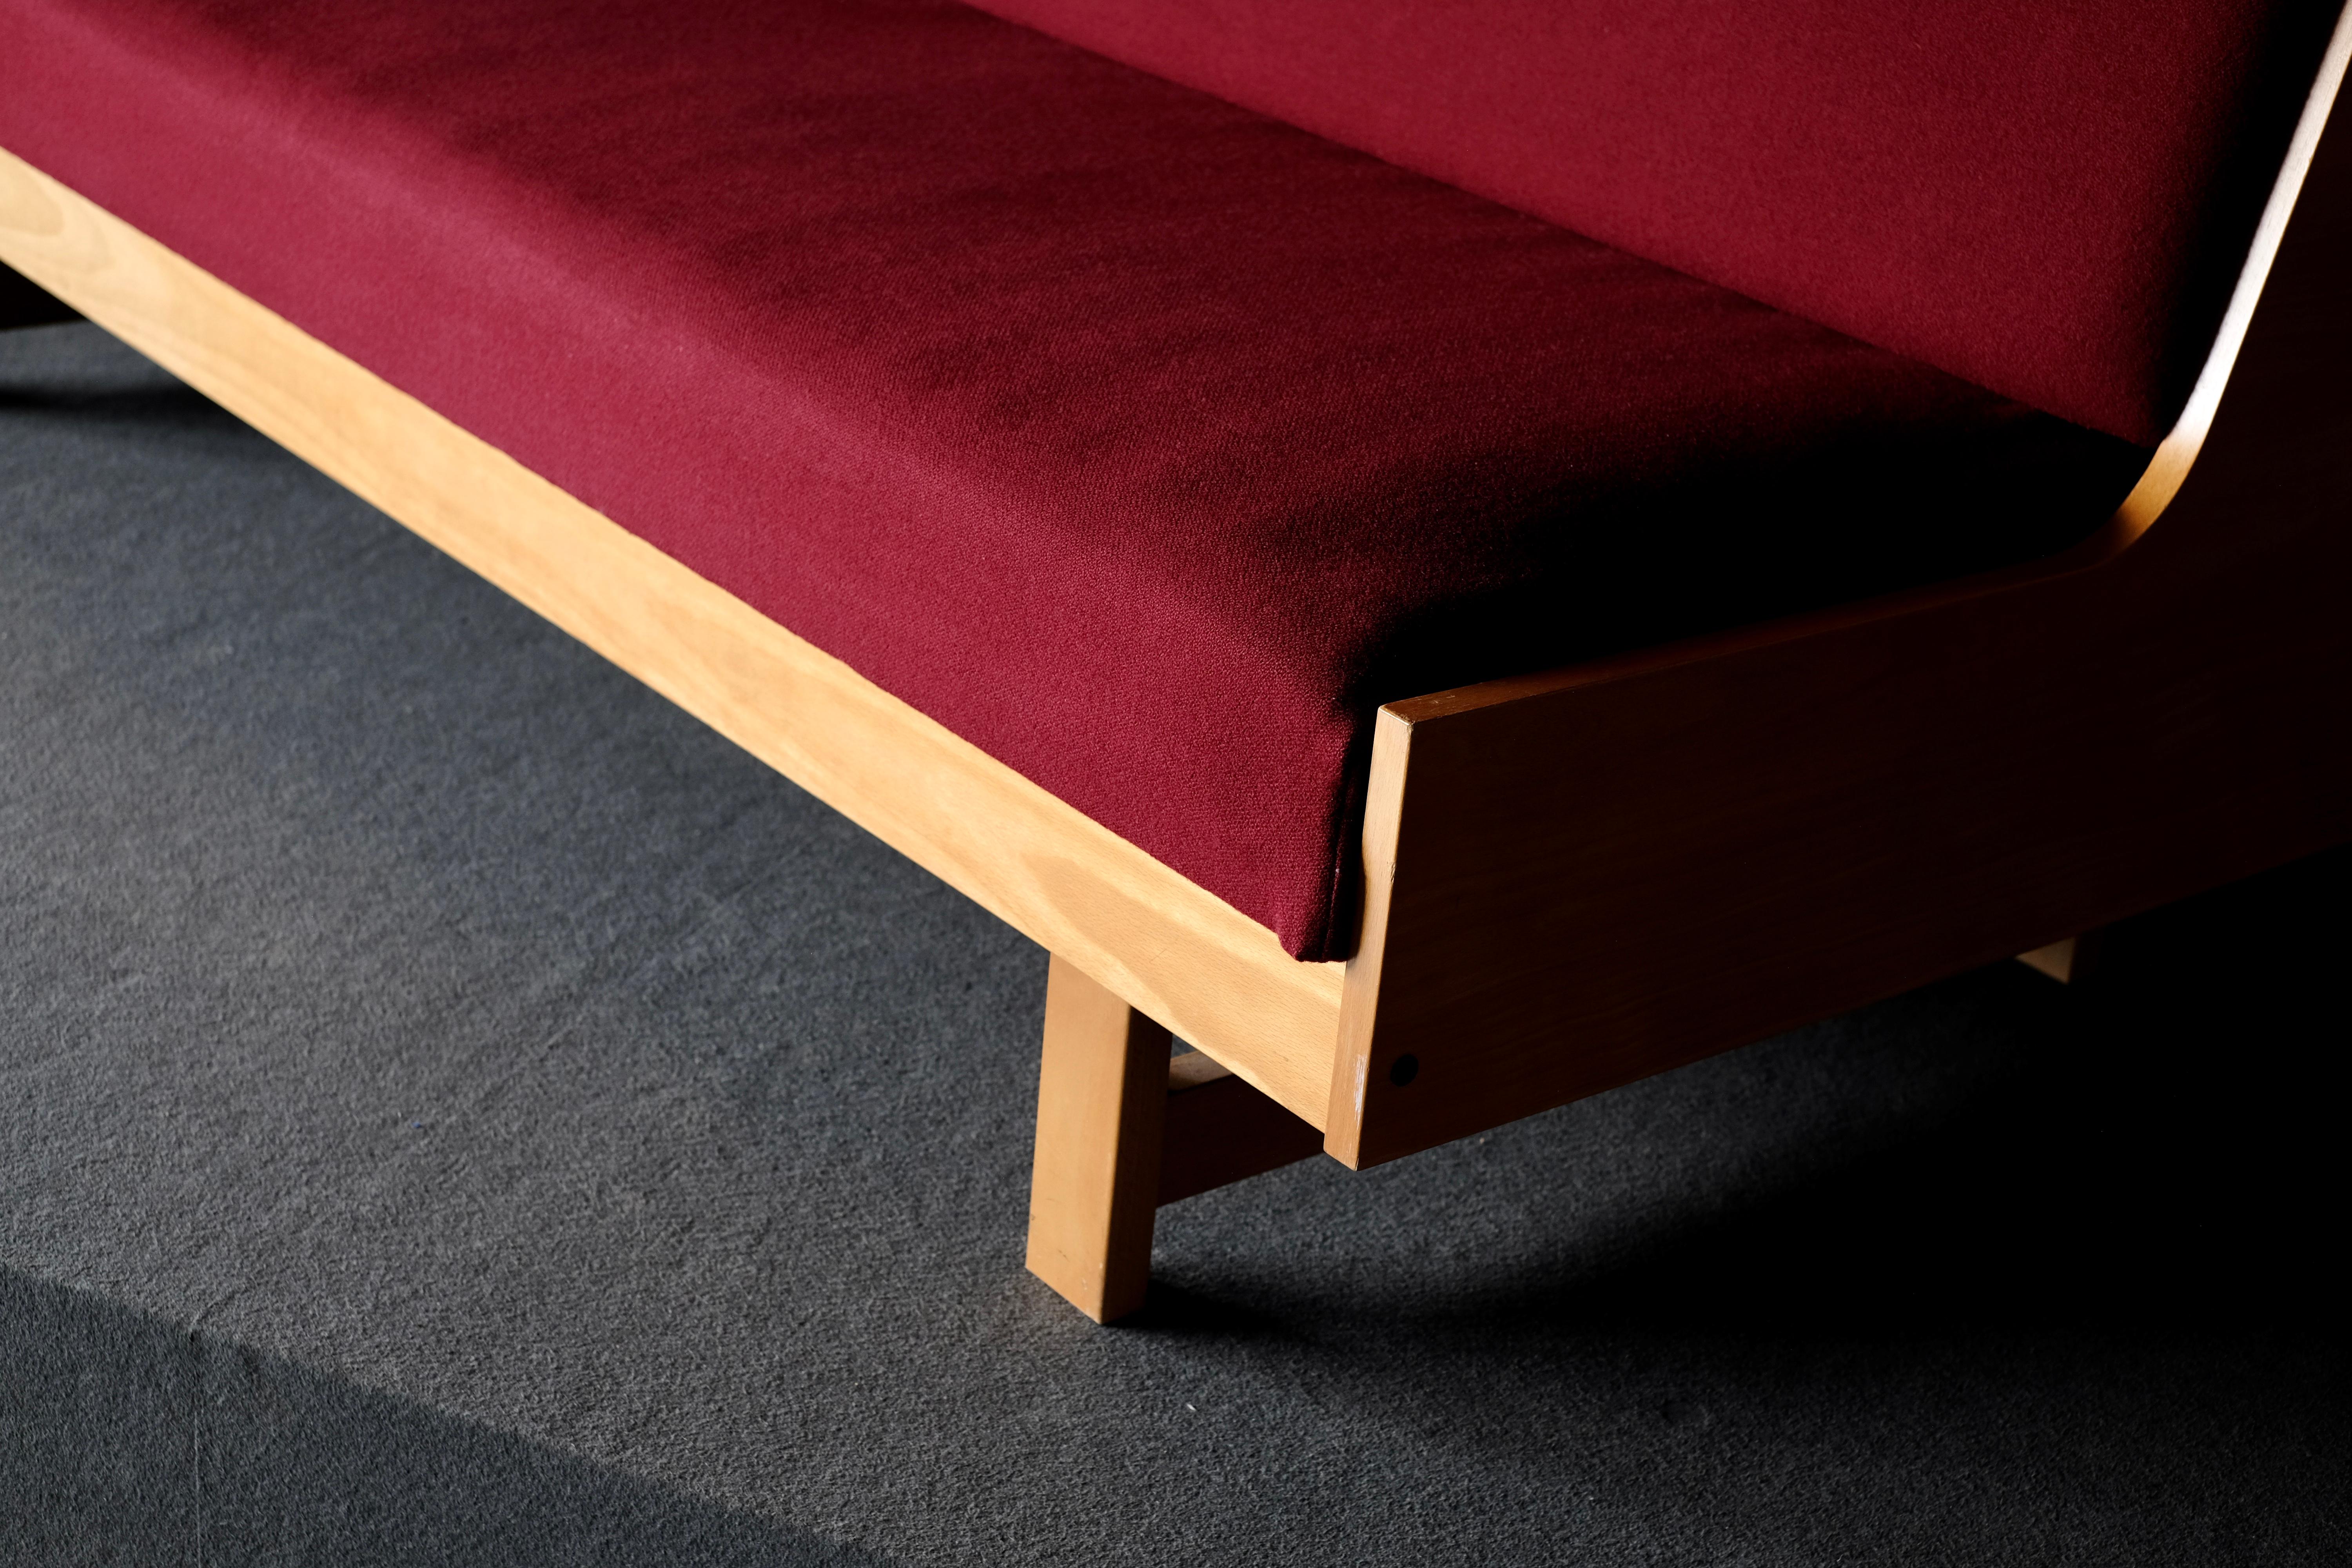 Sofa, which opens out to a daybed. It is upholstered in wool. Really clever mechanism makes this very functional and a real space saver.